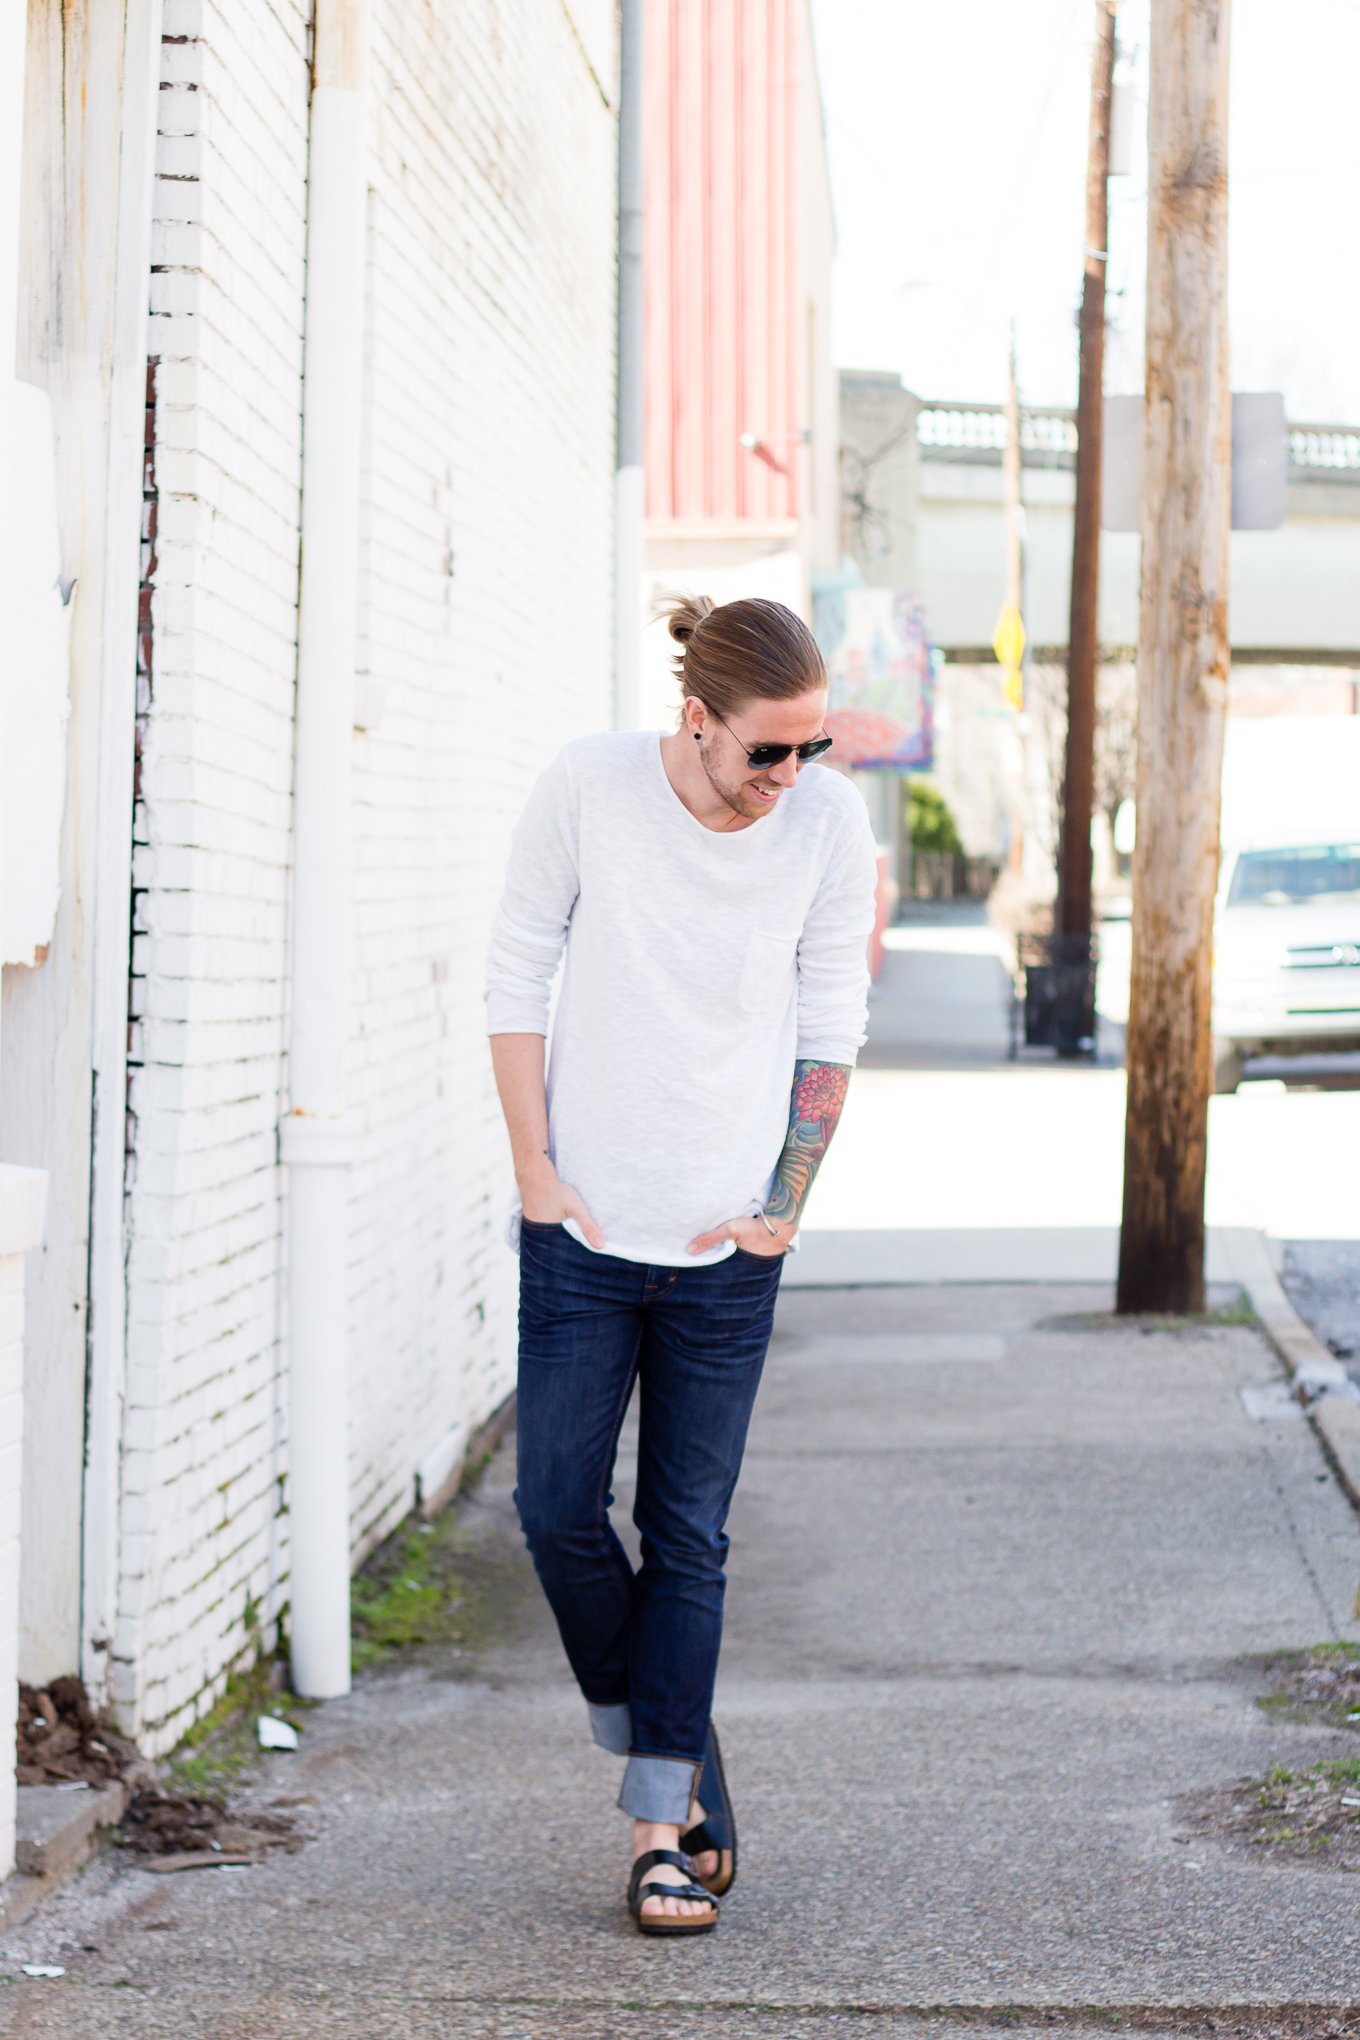 H&M Shirt + DSTLD Jeans on The Kentucky Gent